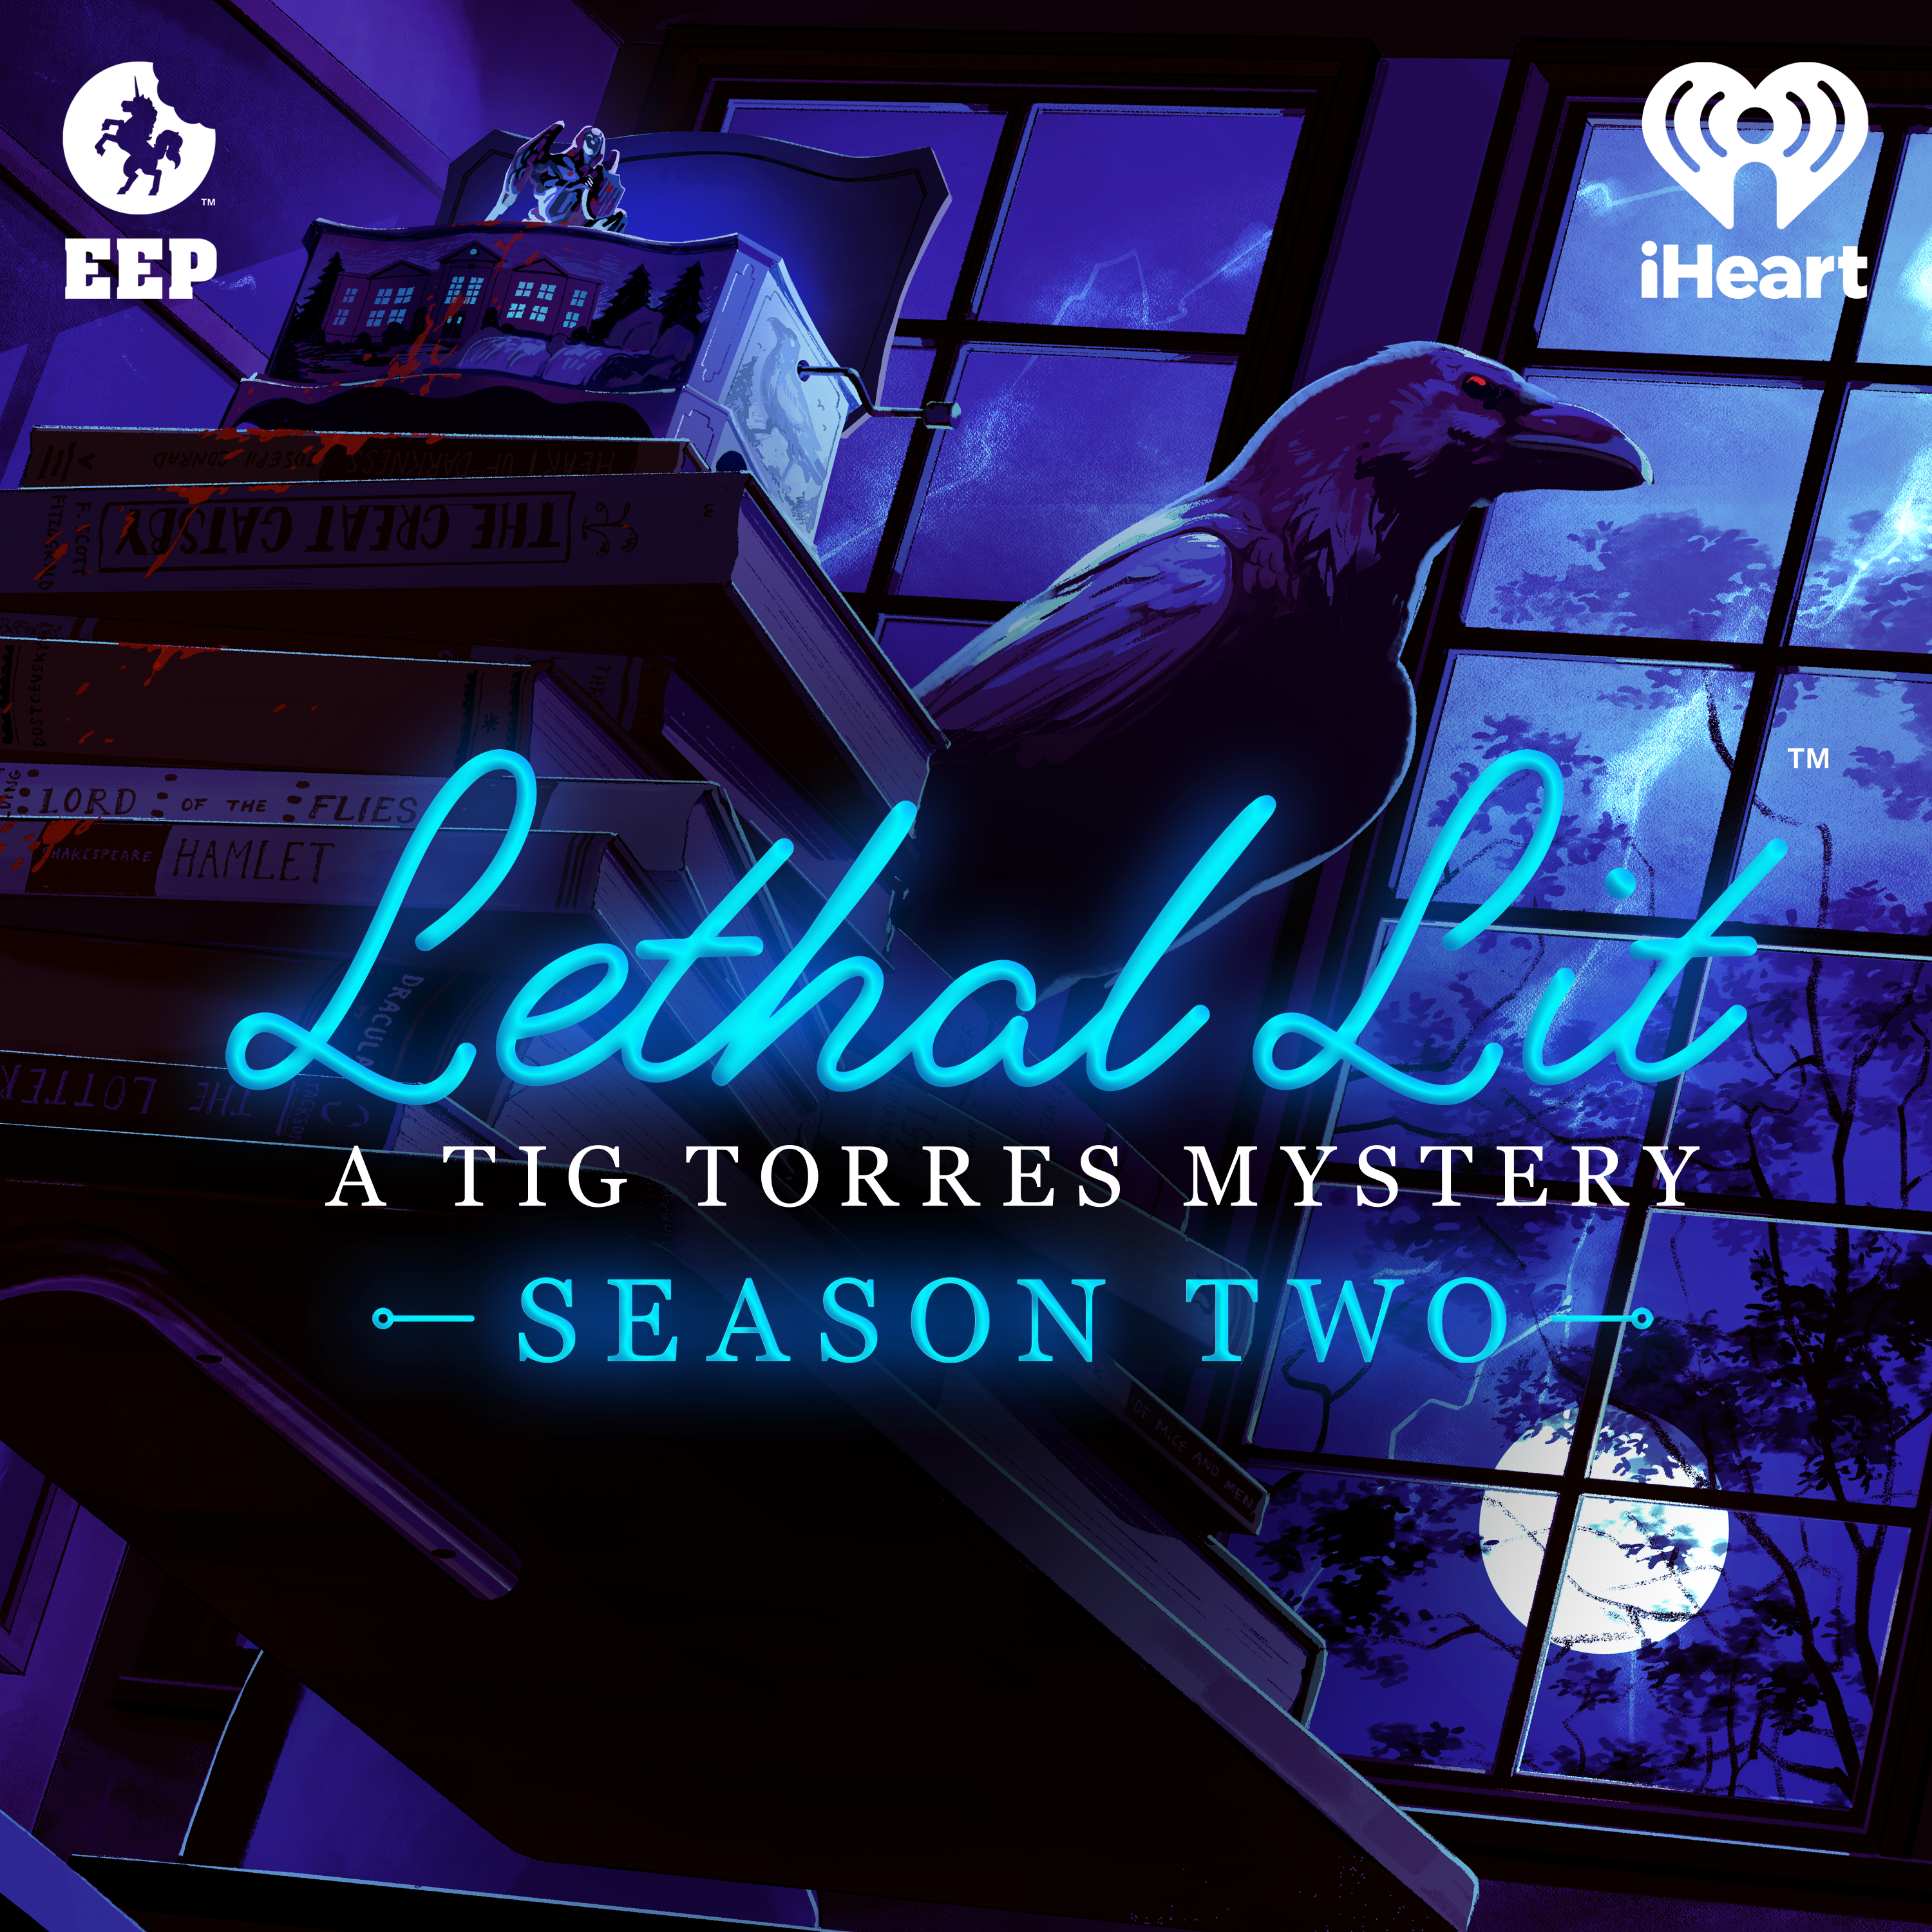 Catch the Clues in ALL the Lethal Lit Mysteries So Far!